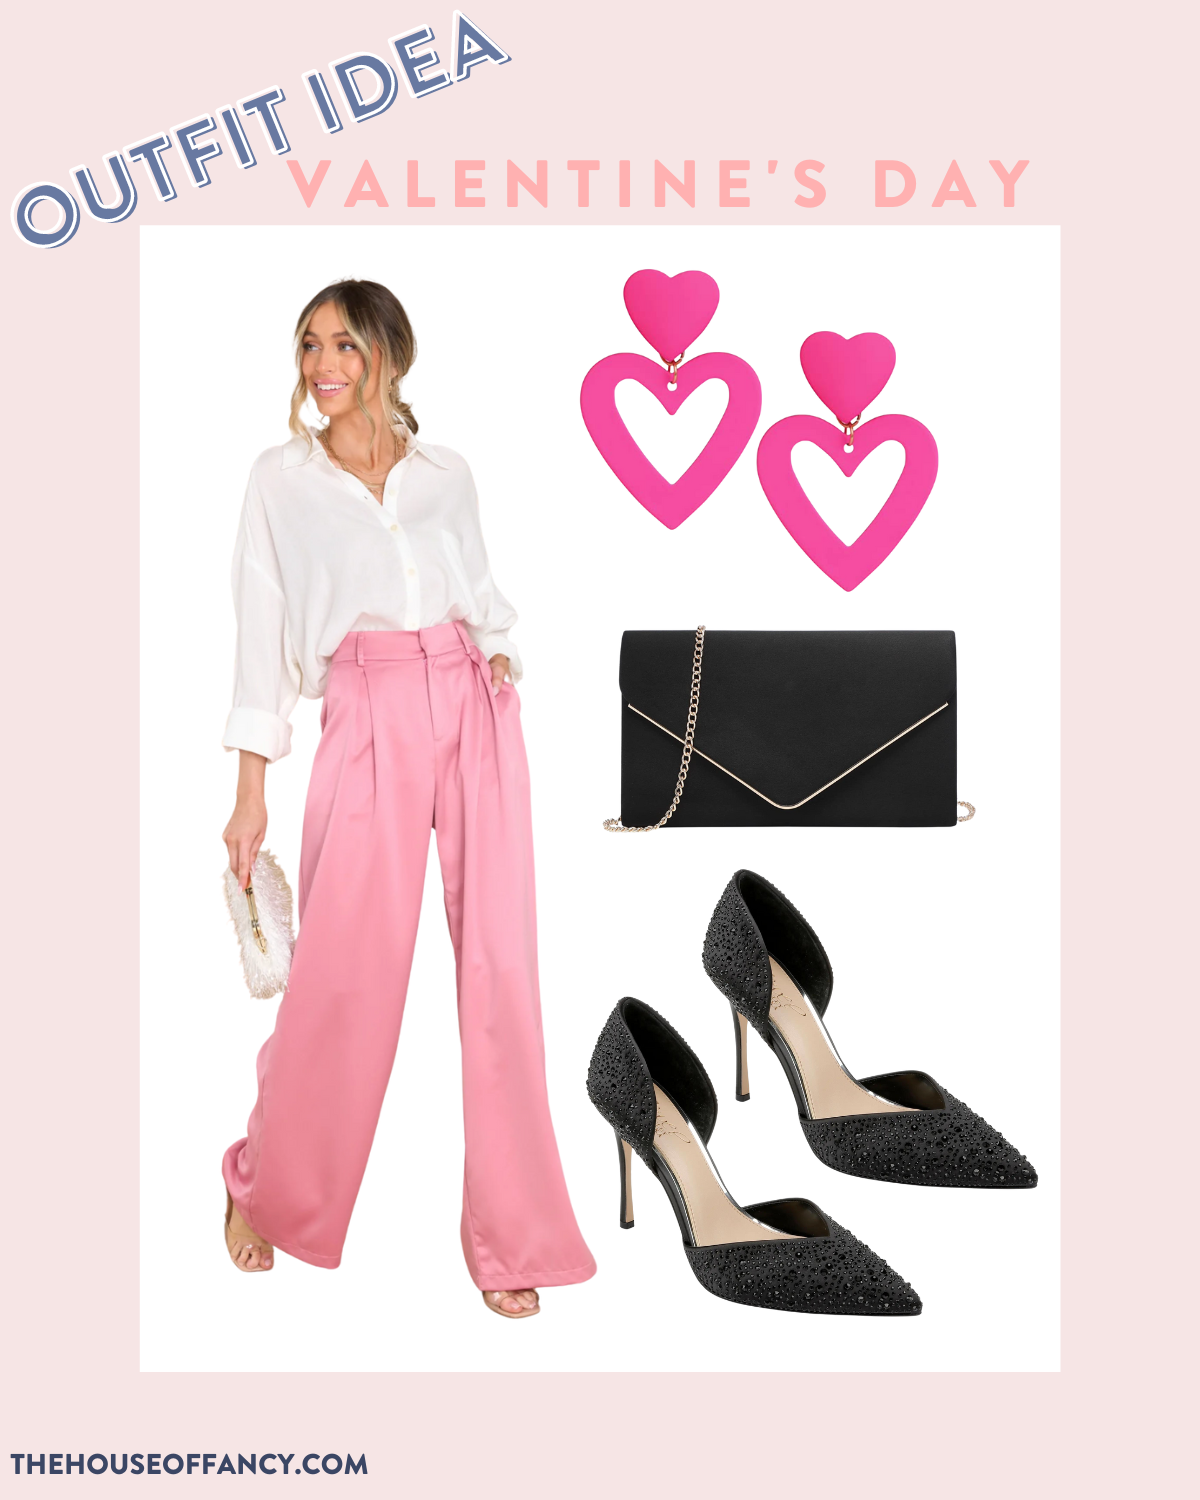 Date Night Outfits Ideas To Bring Out Your Best Look